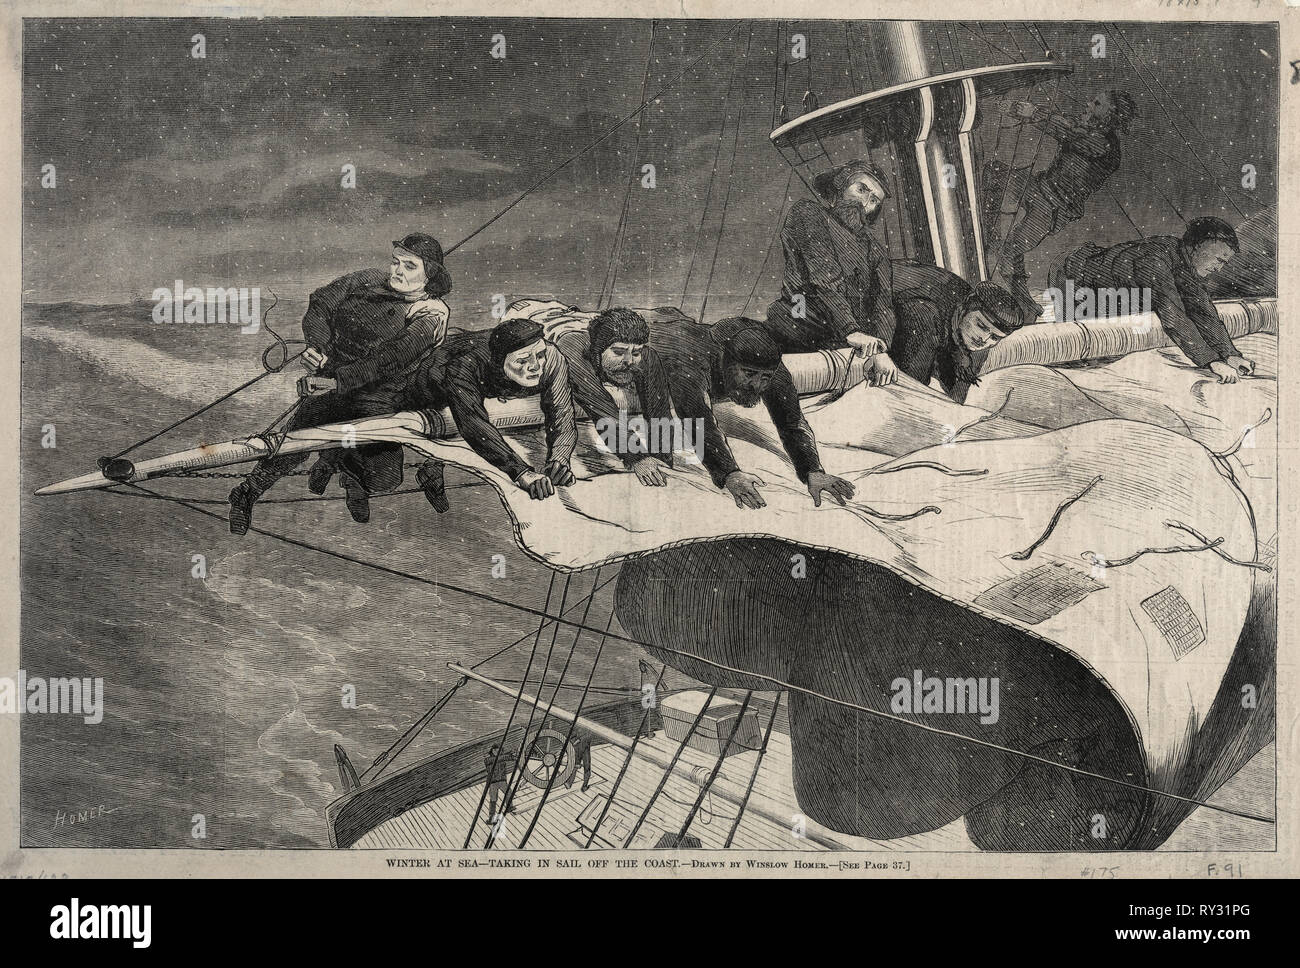 Winter at Sea - Taking in Sail Off the Coast, 1869. Winslow Homer (American, 1836-1910). Wood engraving Stock Photo